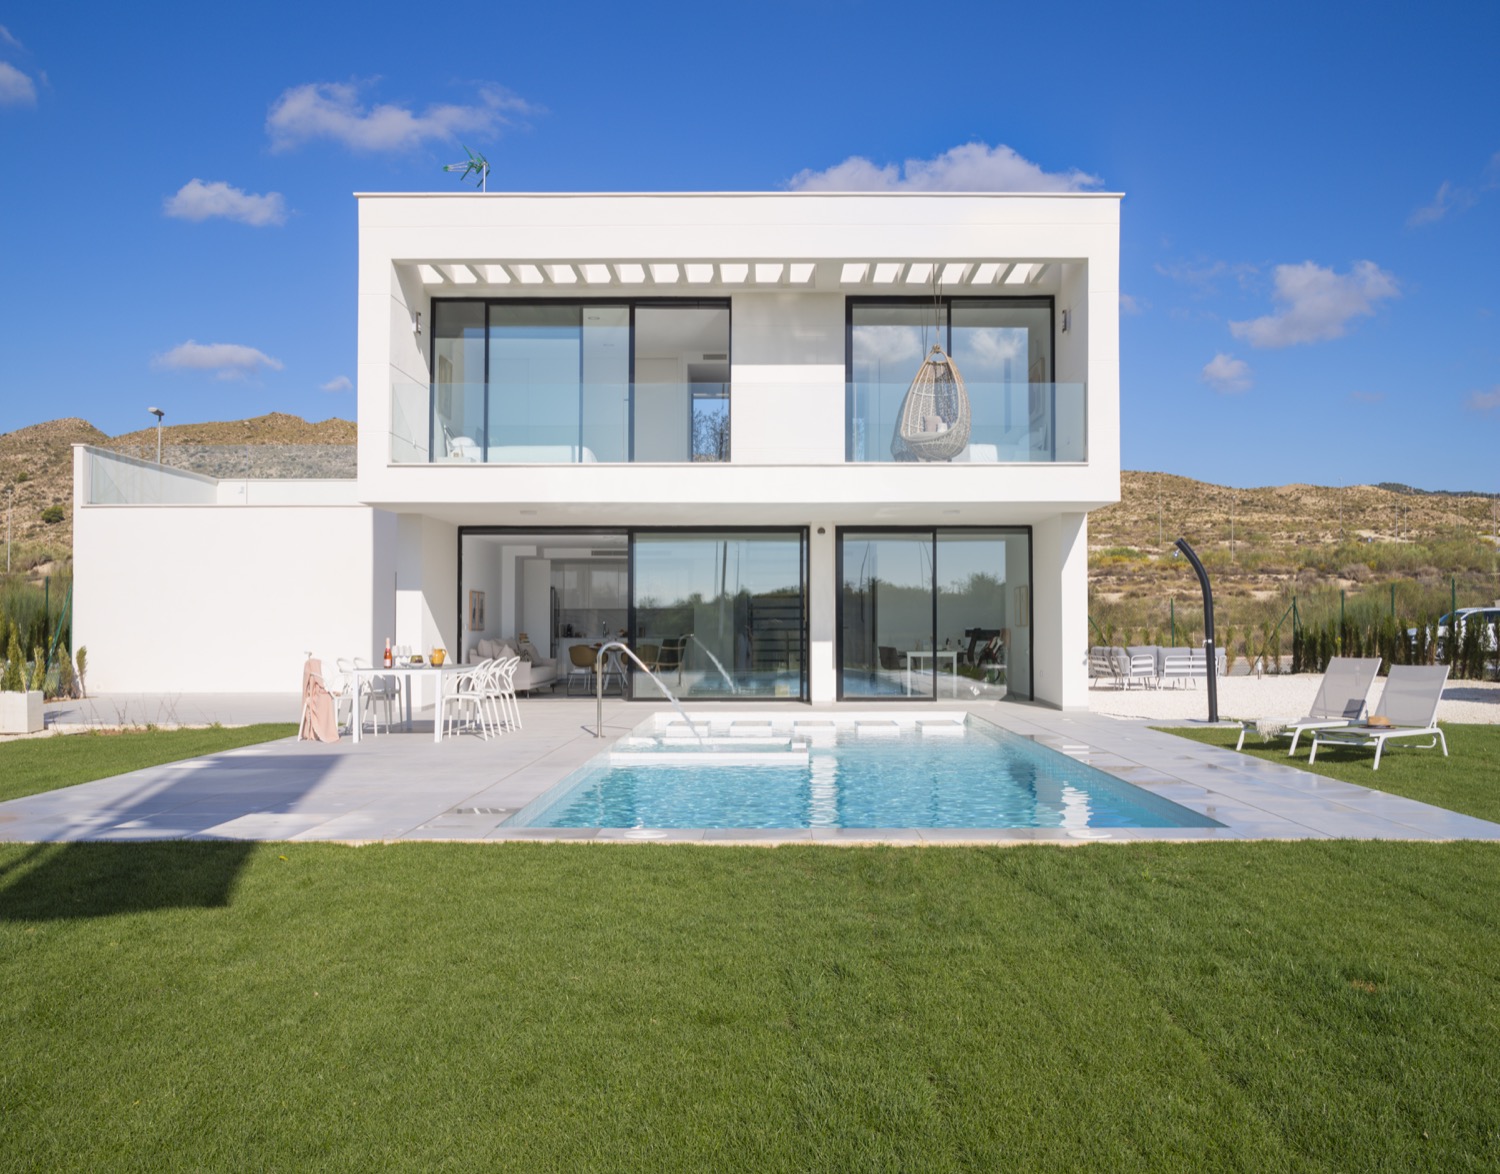 Luxurious detached villas on large plots just 12 minutes from Murcia